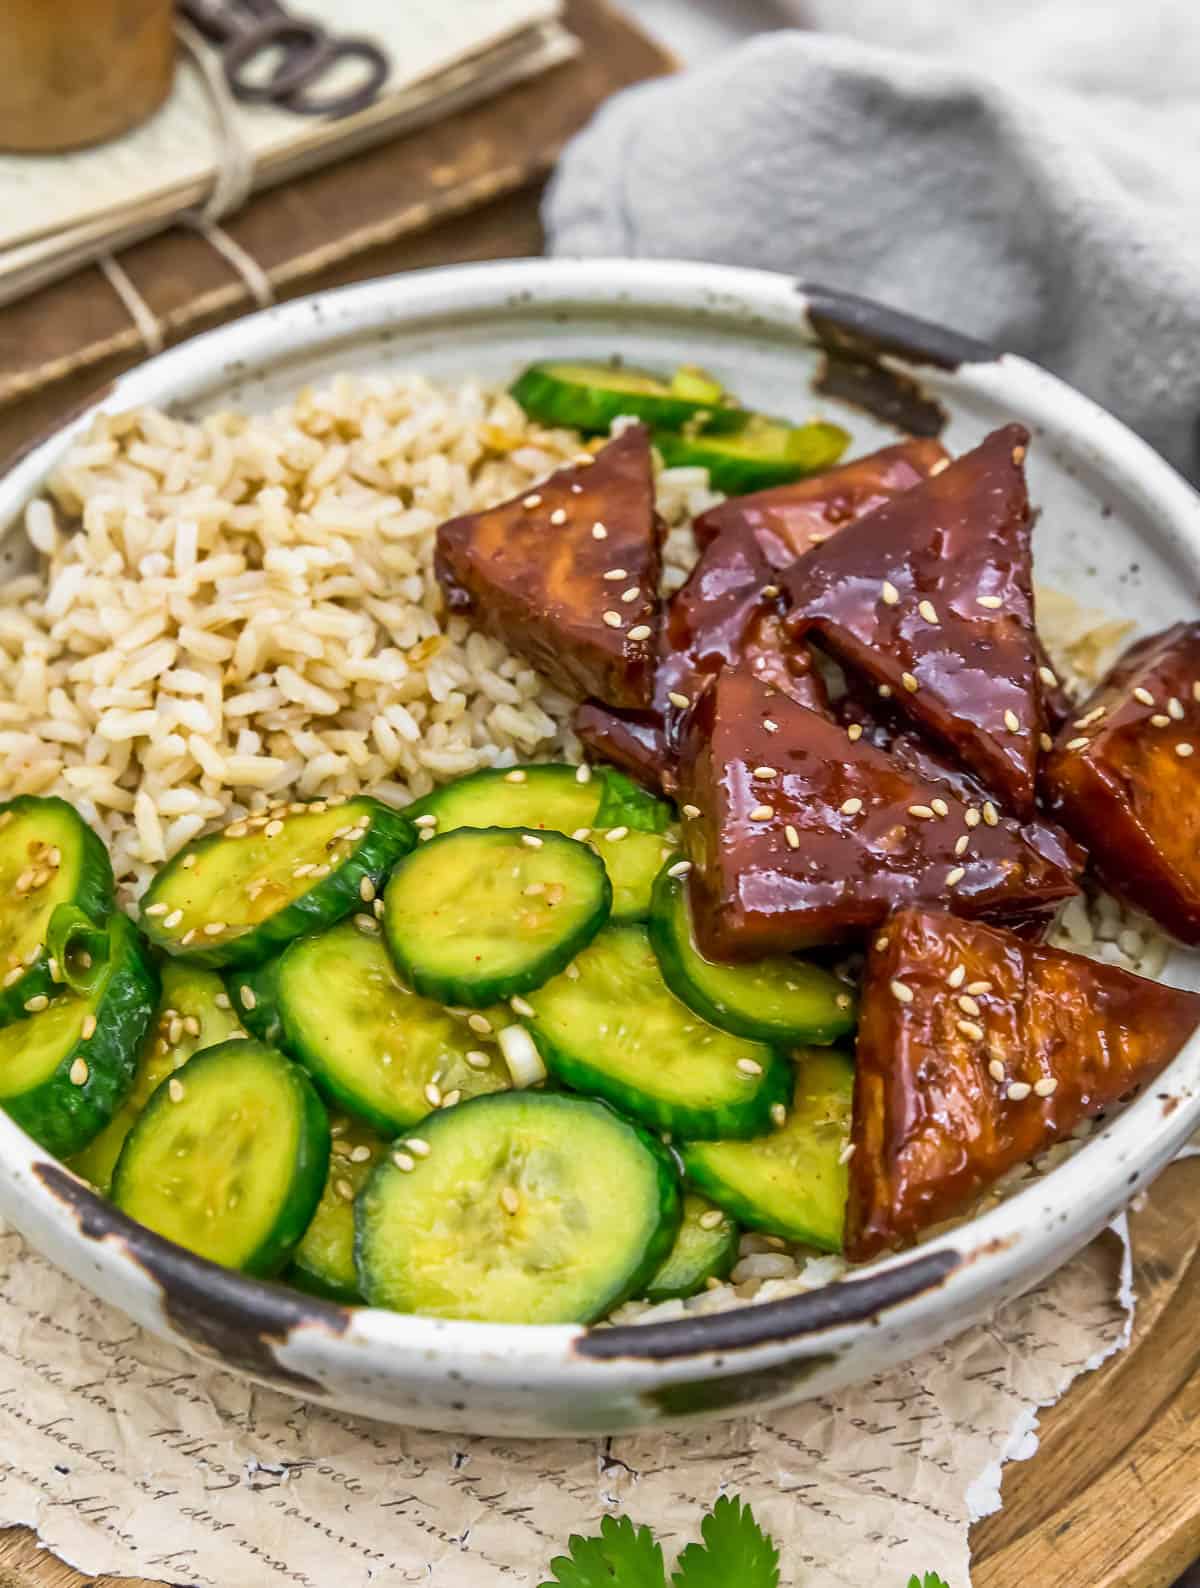 Oil Free Spicy Asian Cucumber Salad with tofu and rice